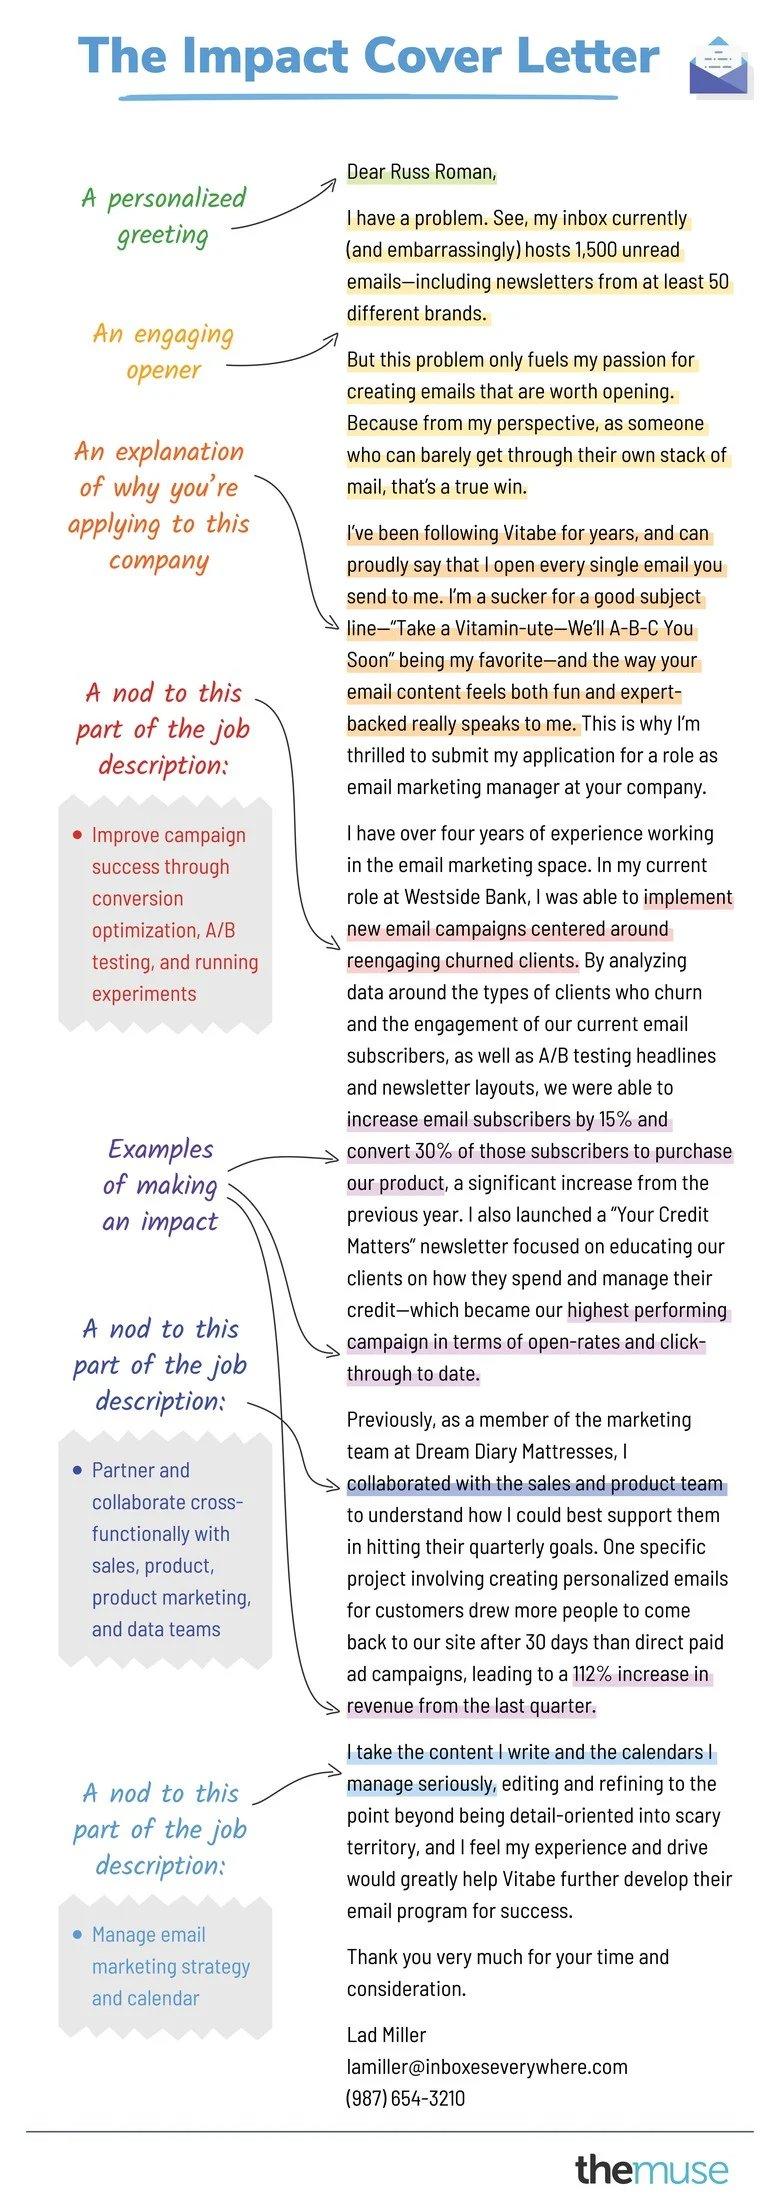 infographic of impact cover letter example pointing out different elements of cover letter